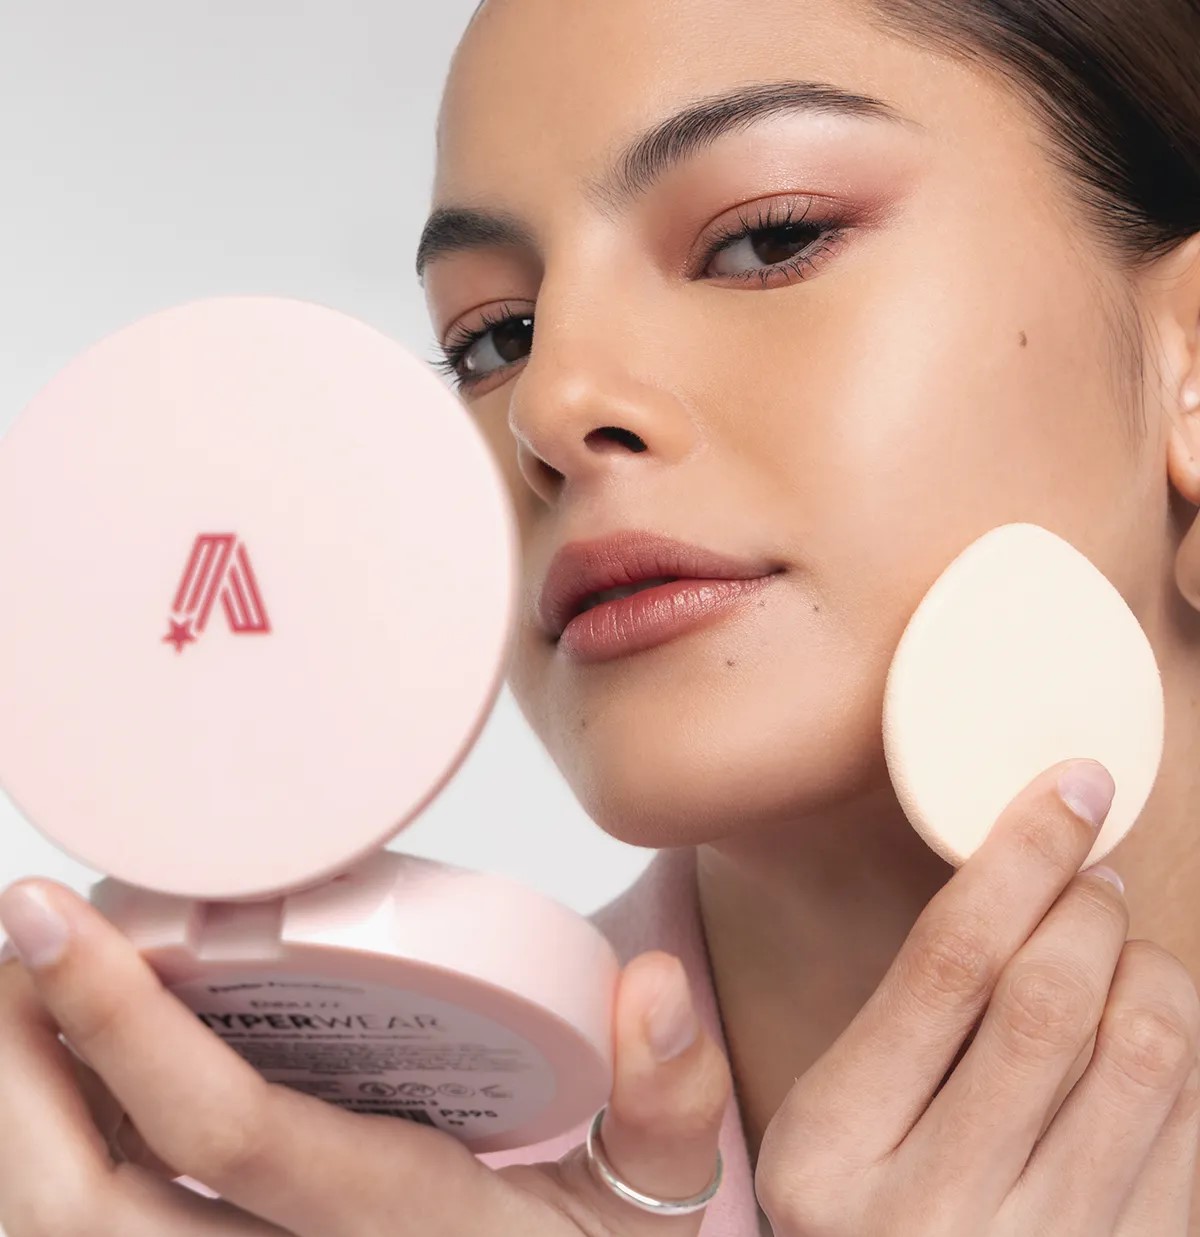 Filipino Beauty Brands Available in The US